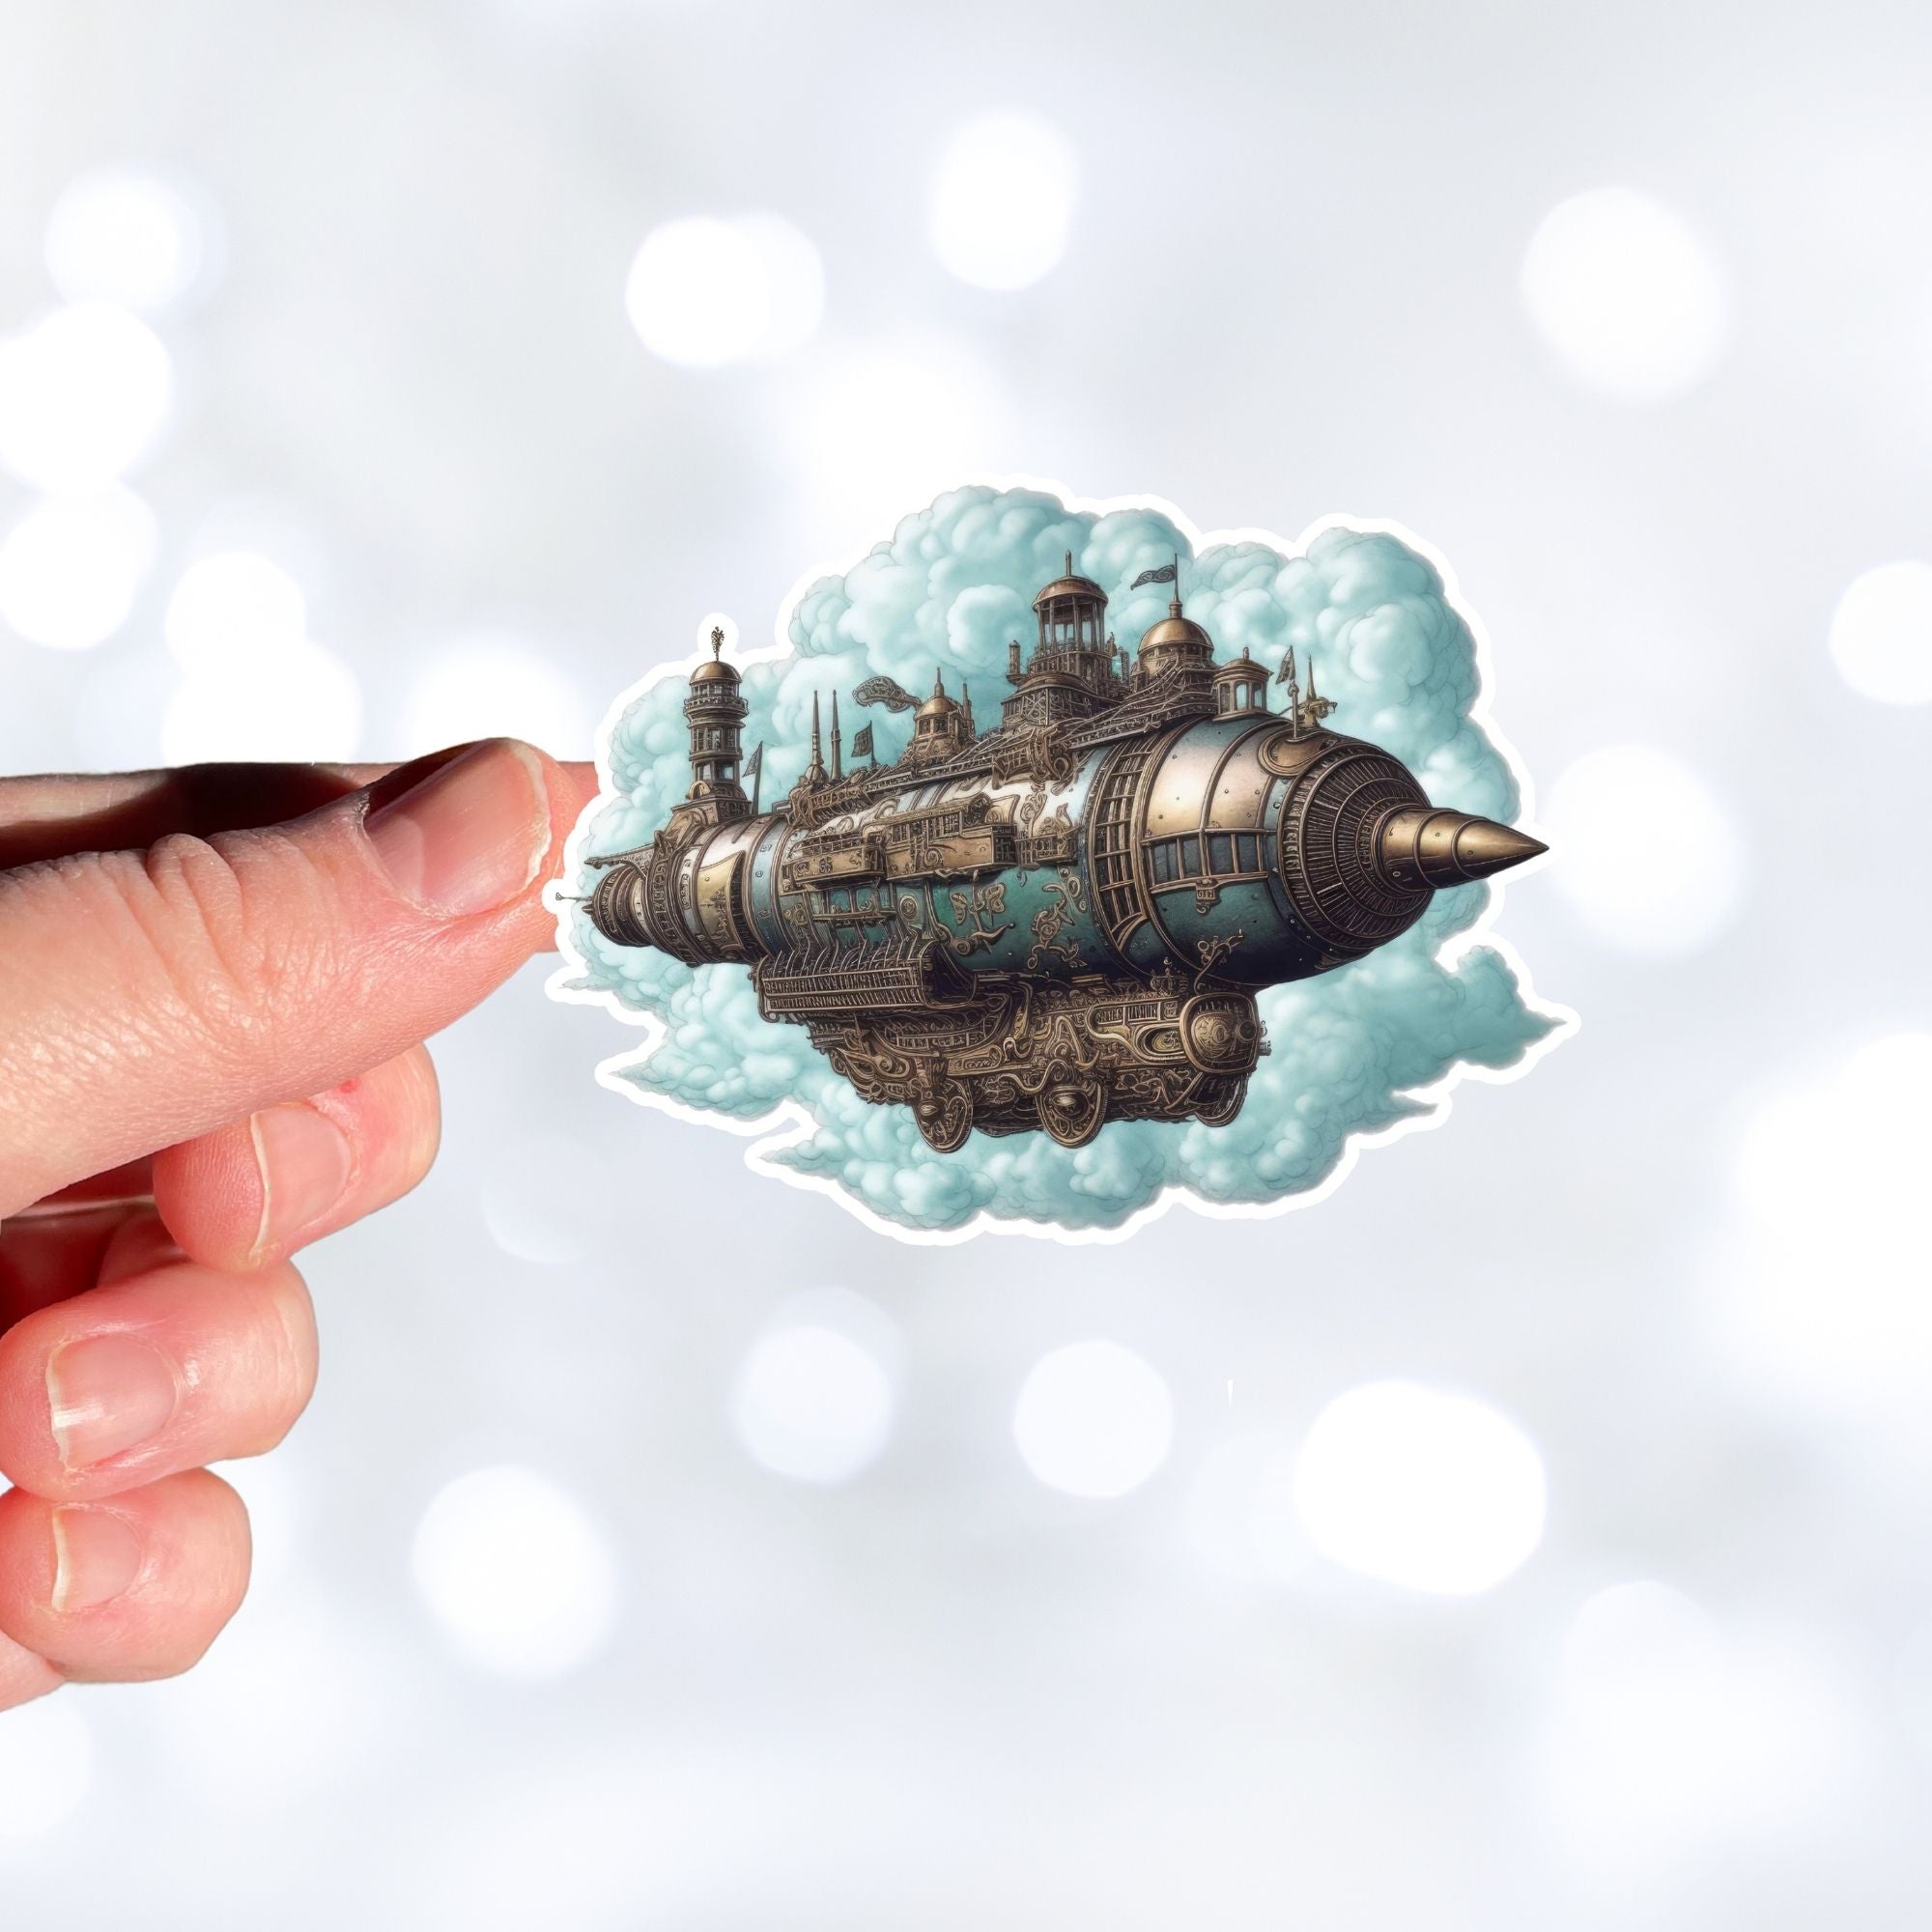 This image shows a hand holding the Steampunk Airship 4 Die-Cut Sticker.